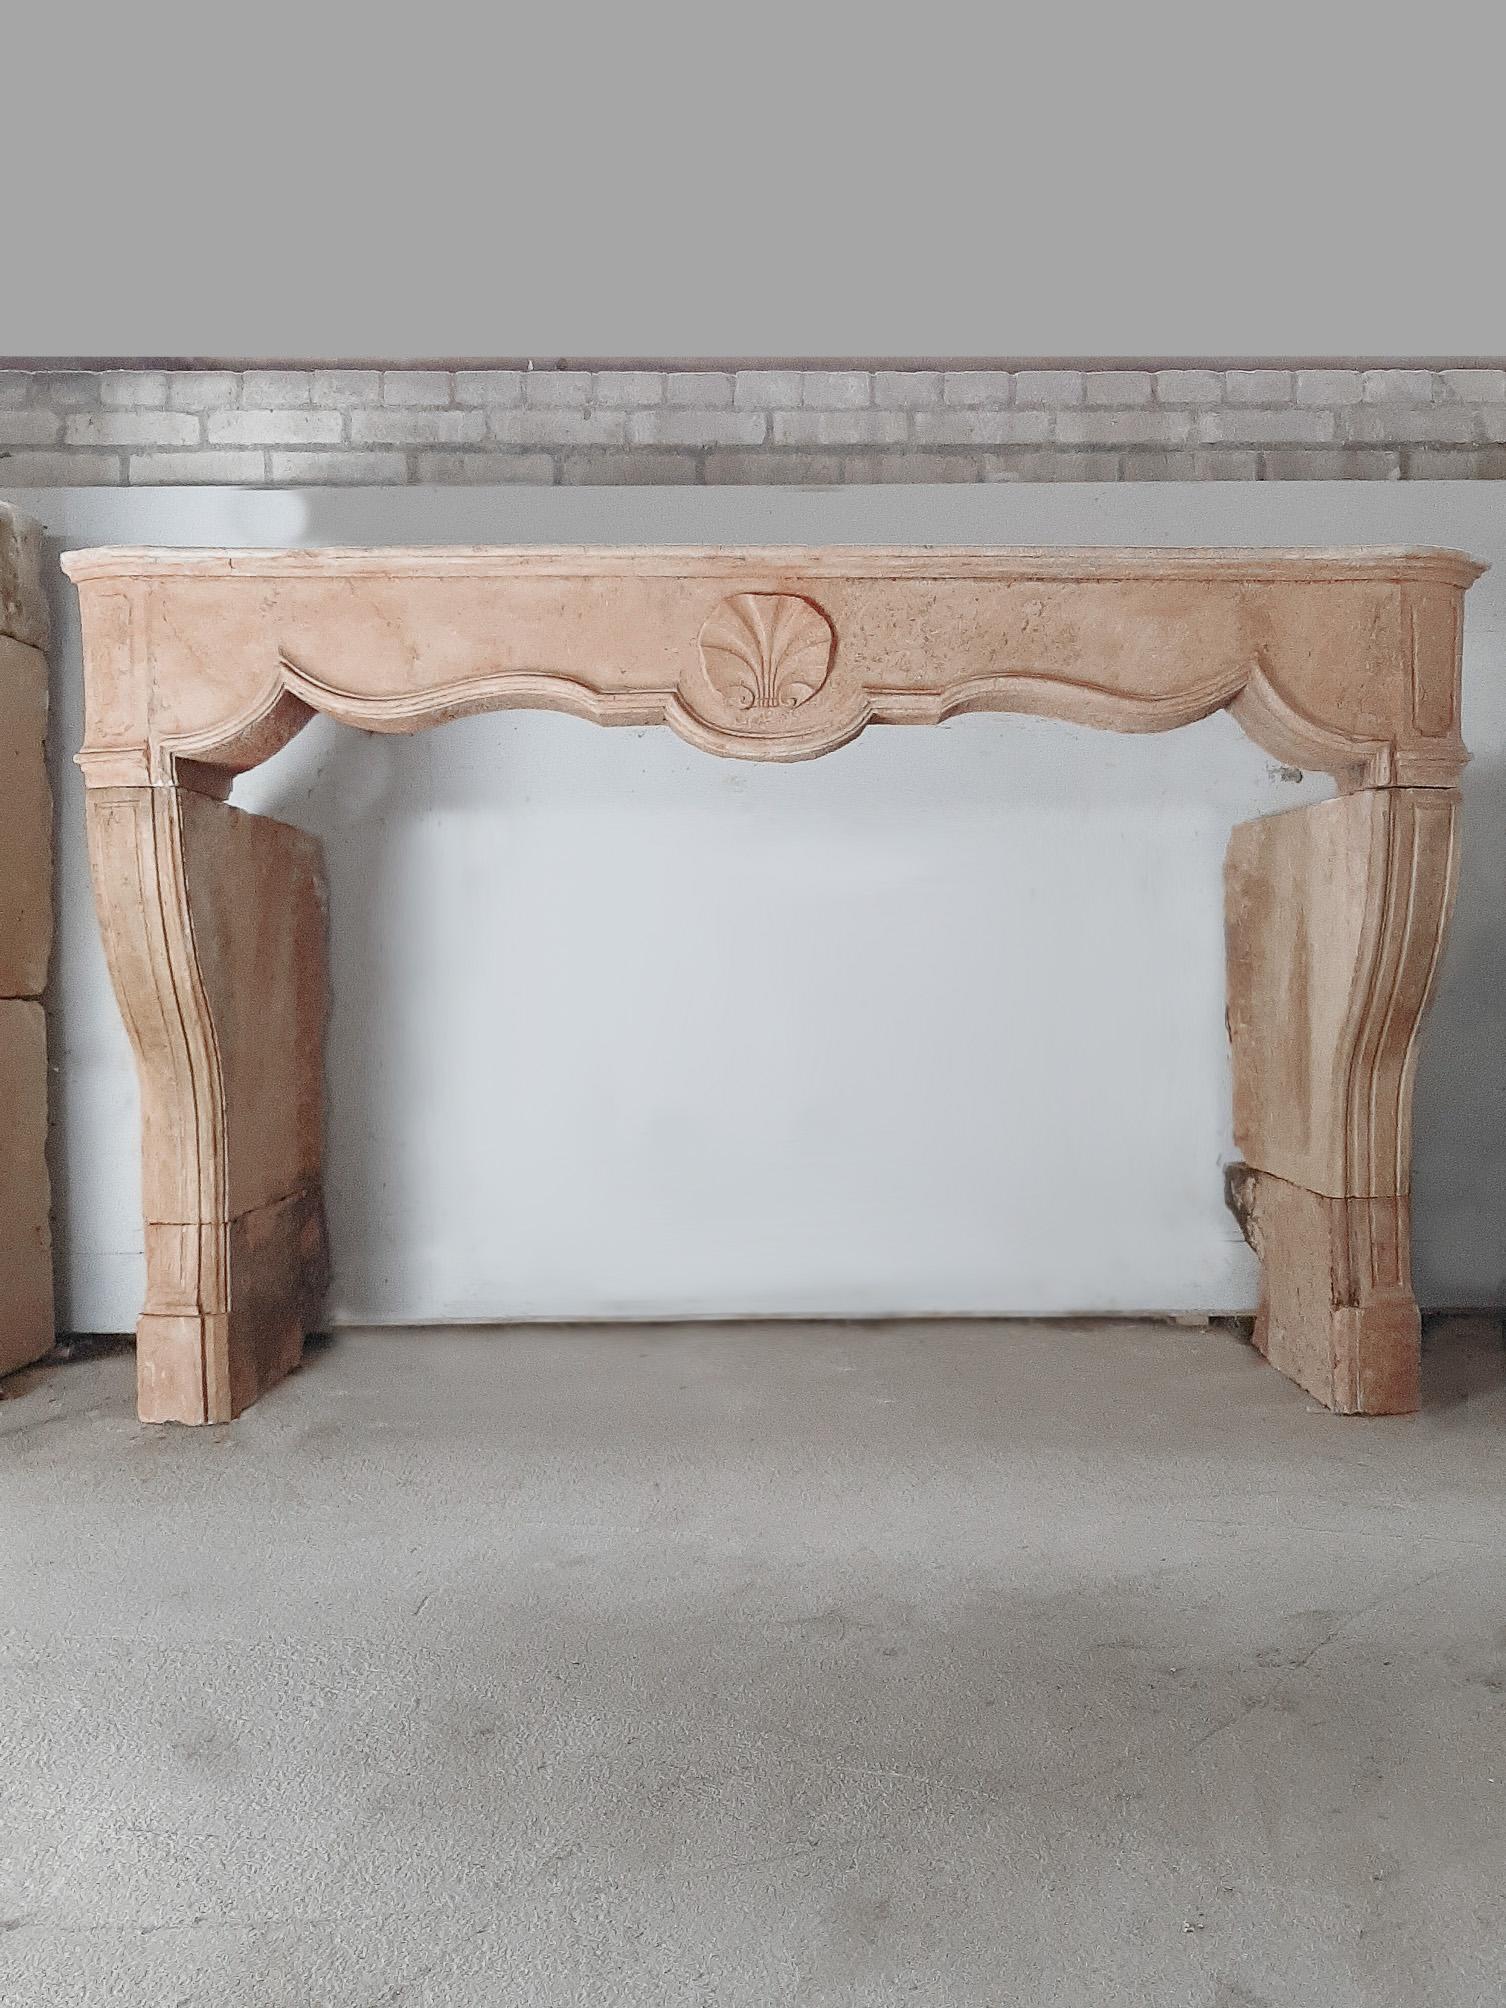 18th century French Regency (Régence) mantelpiece, made of peach colored limestone.

The Régence was the period in French history between 1715 and 1723, when King Louis XV was a minor and the country was governed by Philippe d'Orléans.

The